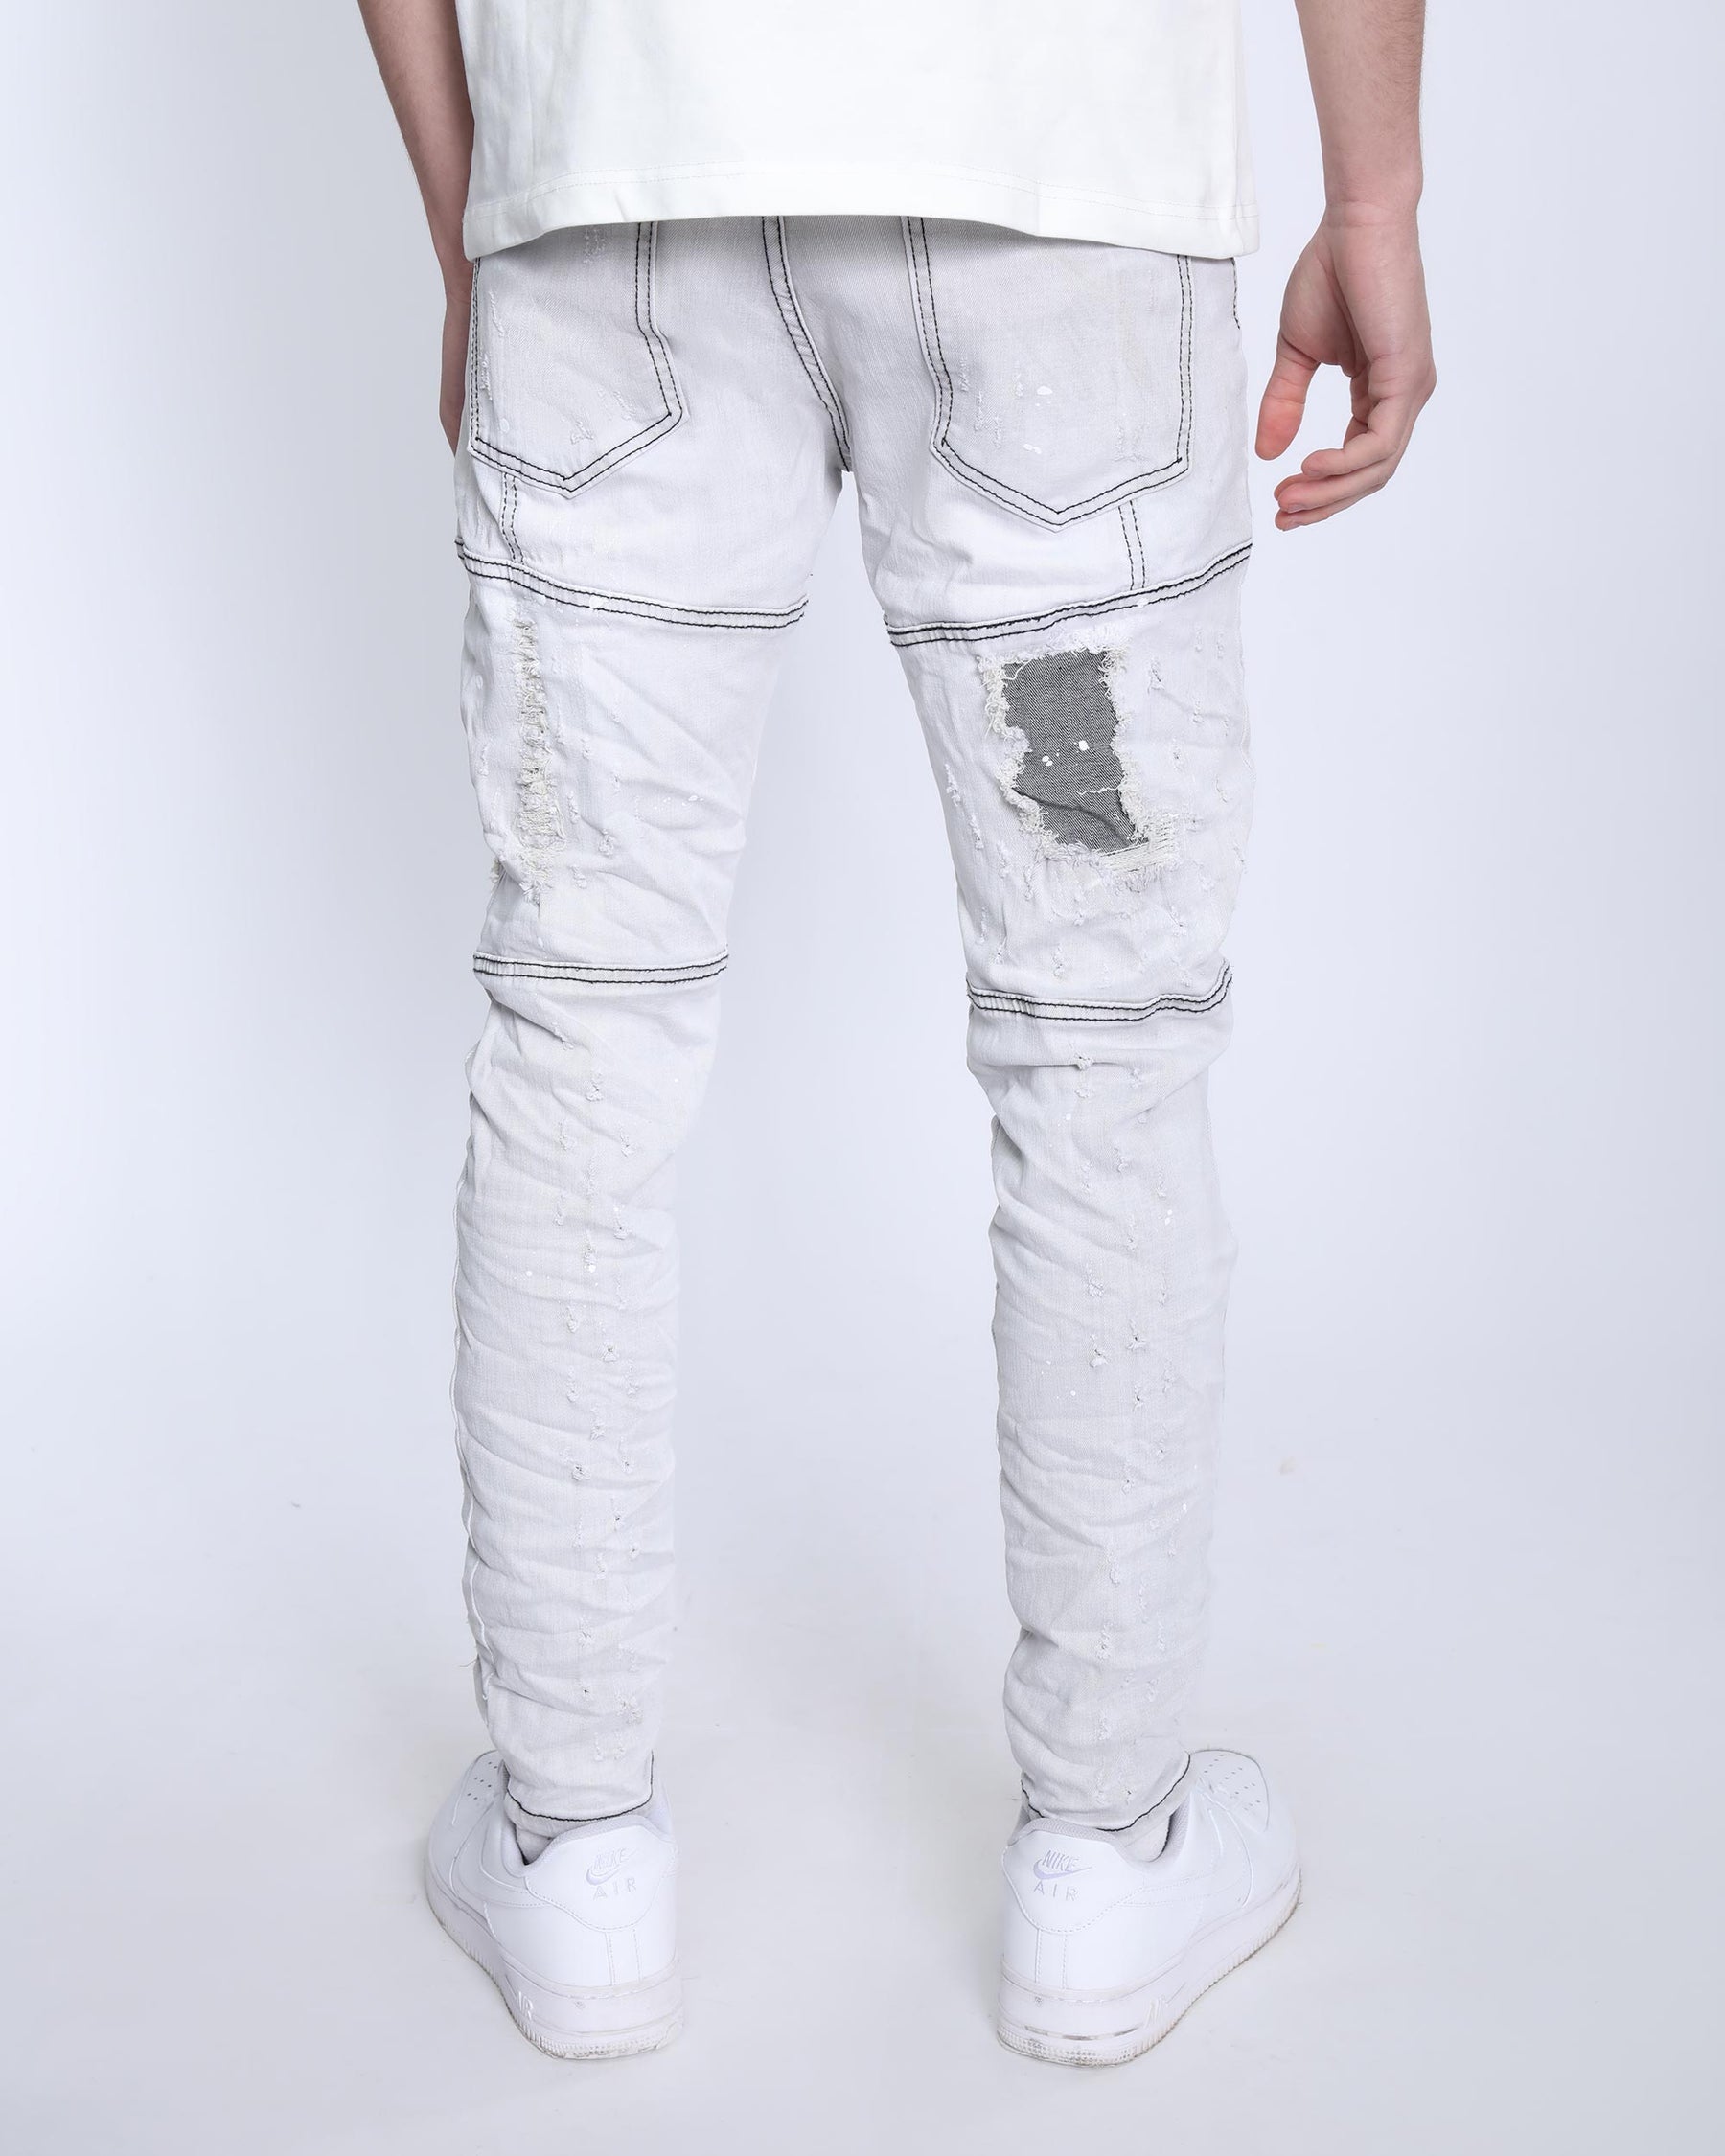 Slim Fit Gray Jeans with Rips, Patches, and Distressed Detailing